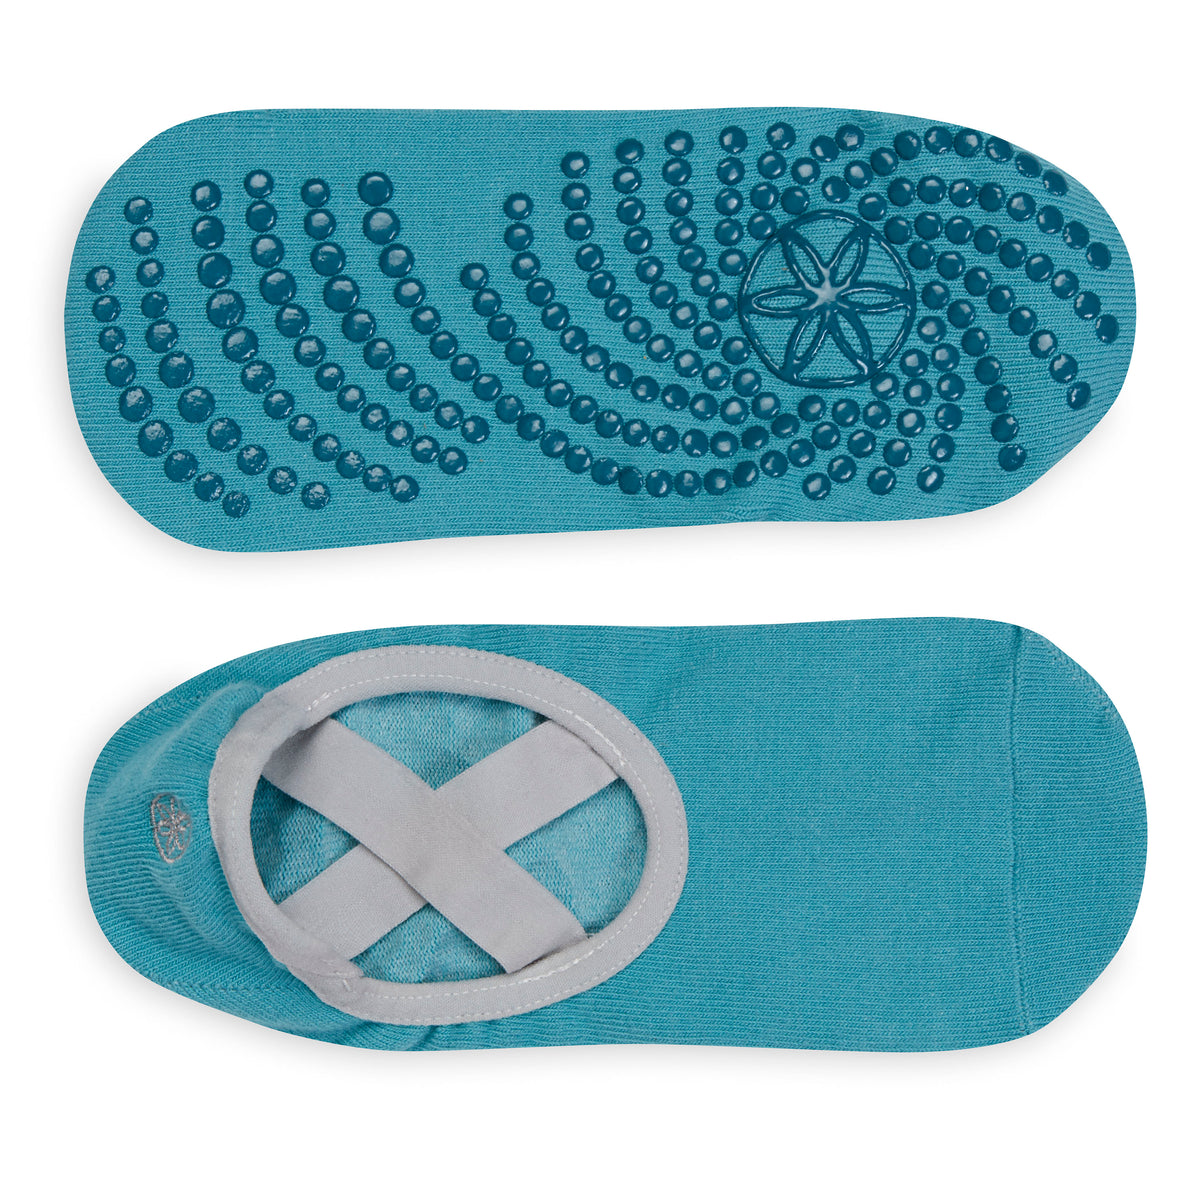 Gaiam Grippy Yoga-Barre Socks - 2 Pack Frost top and bottom